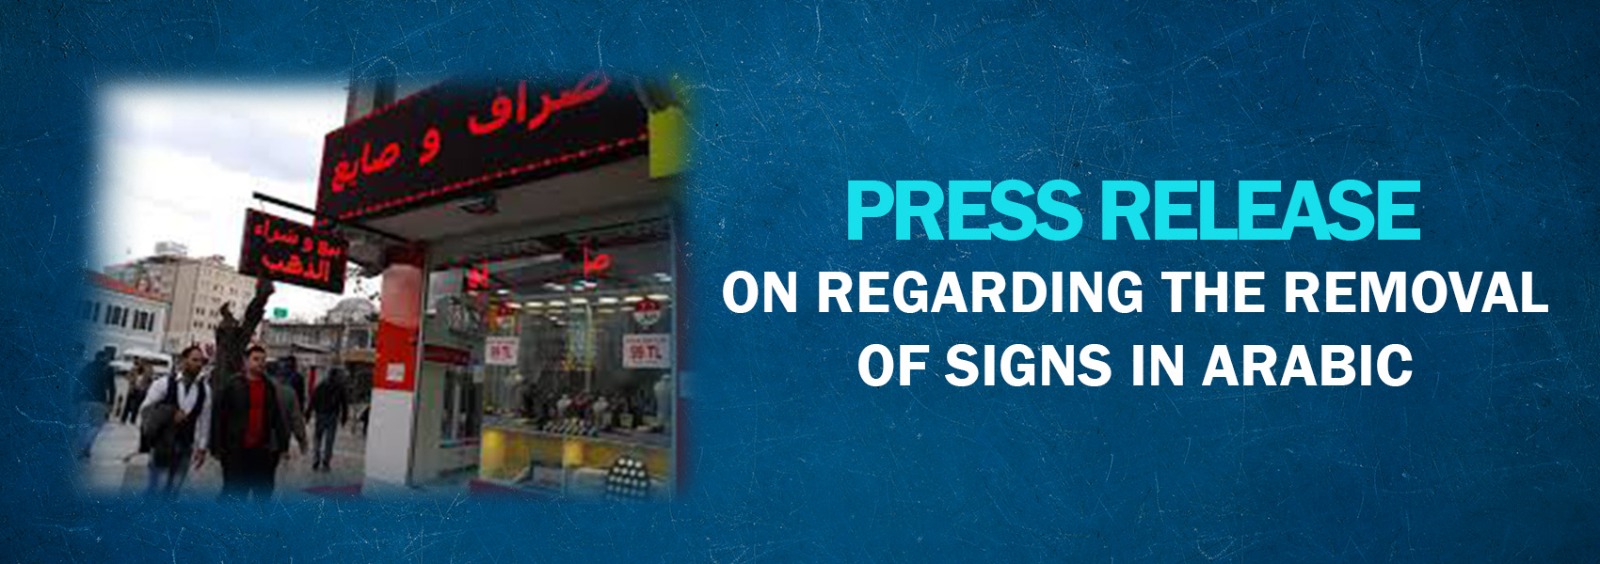 Press Release on Regarding the Removal of Signs in Arabic